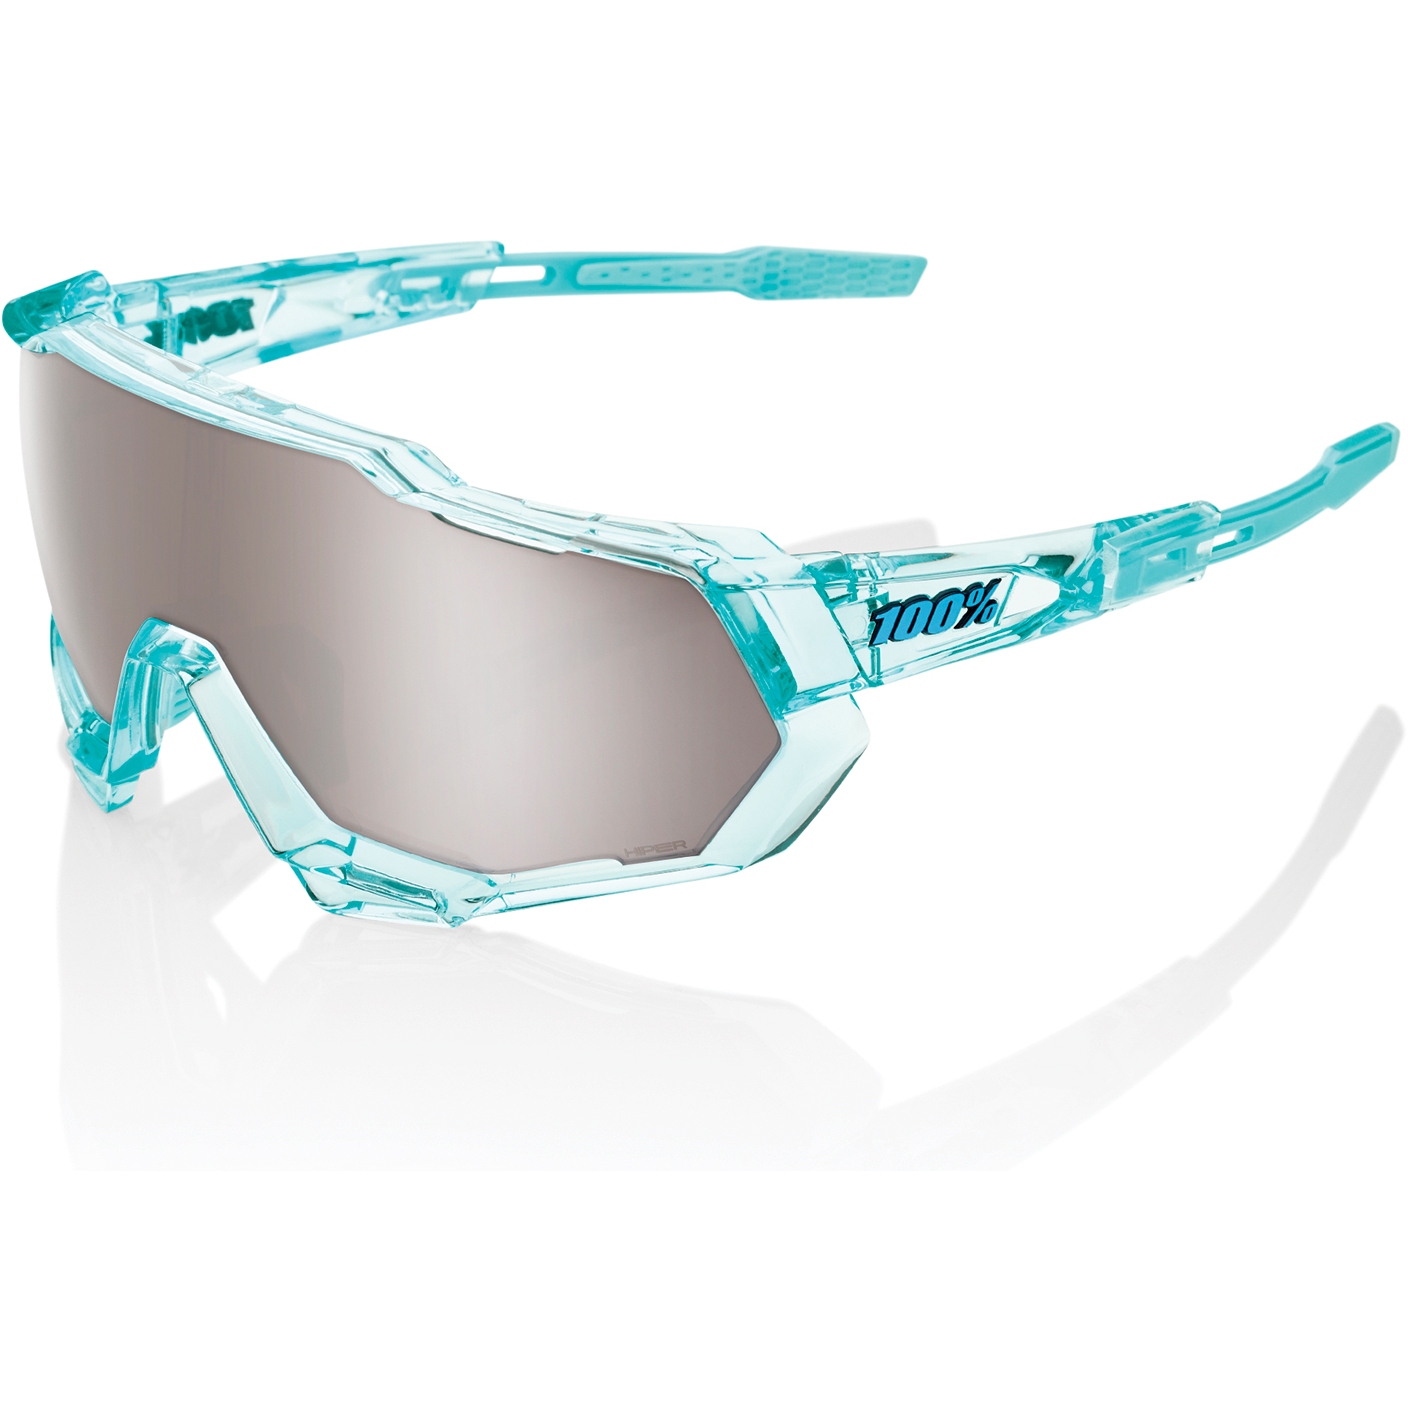 Picture of 100% Speedtrap Glasses - HiPER Mirror Lens - Polished Translucent Mint / Silver + Clear